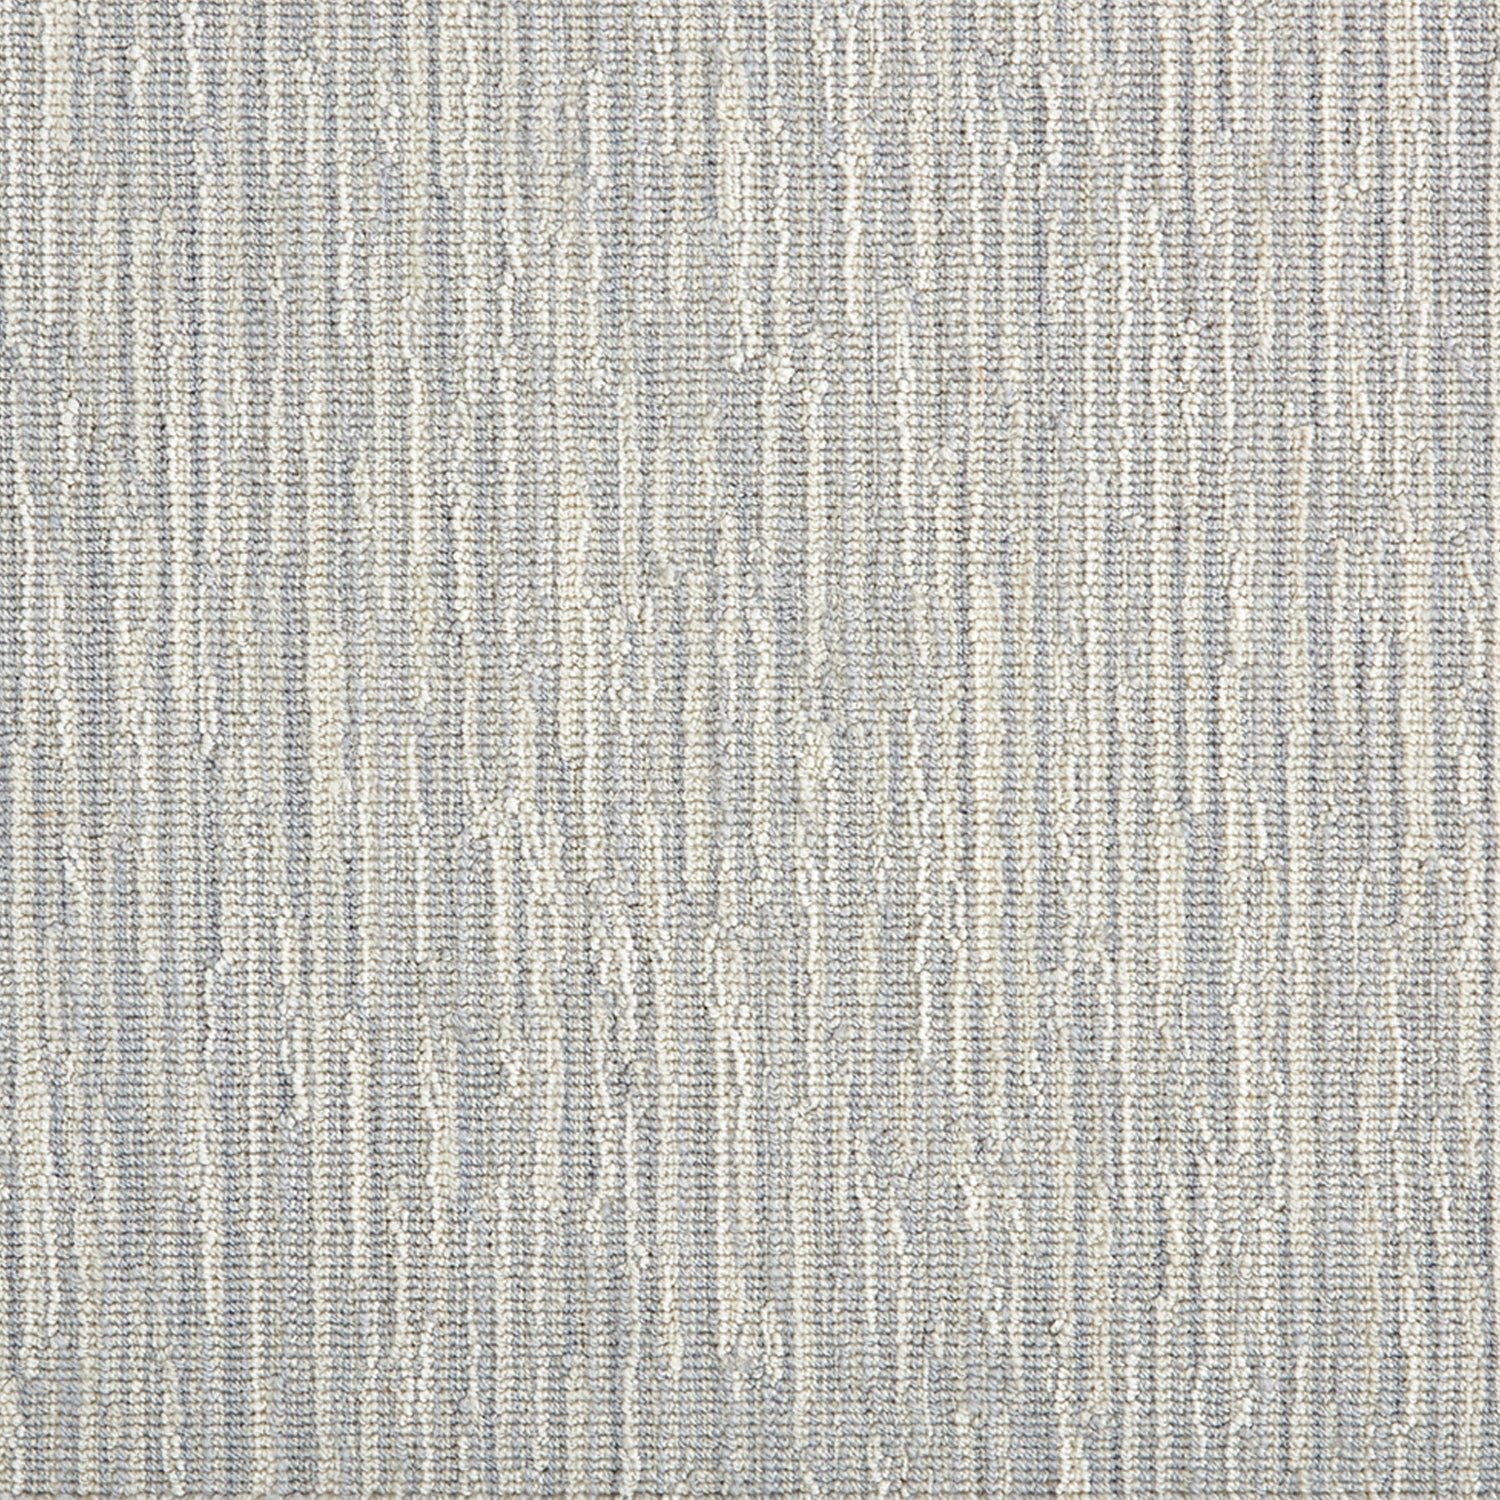 Wool-blend broadloom carpet swatch in a mottled stripe print in shades of cream, gray and gray-blue.